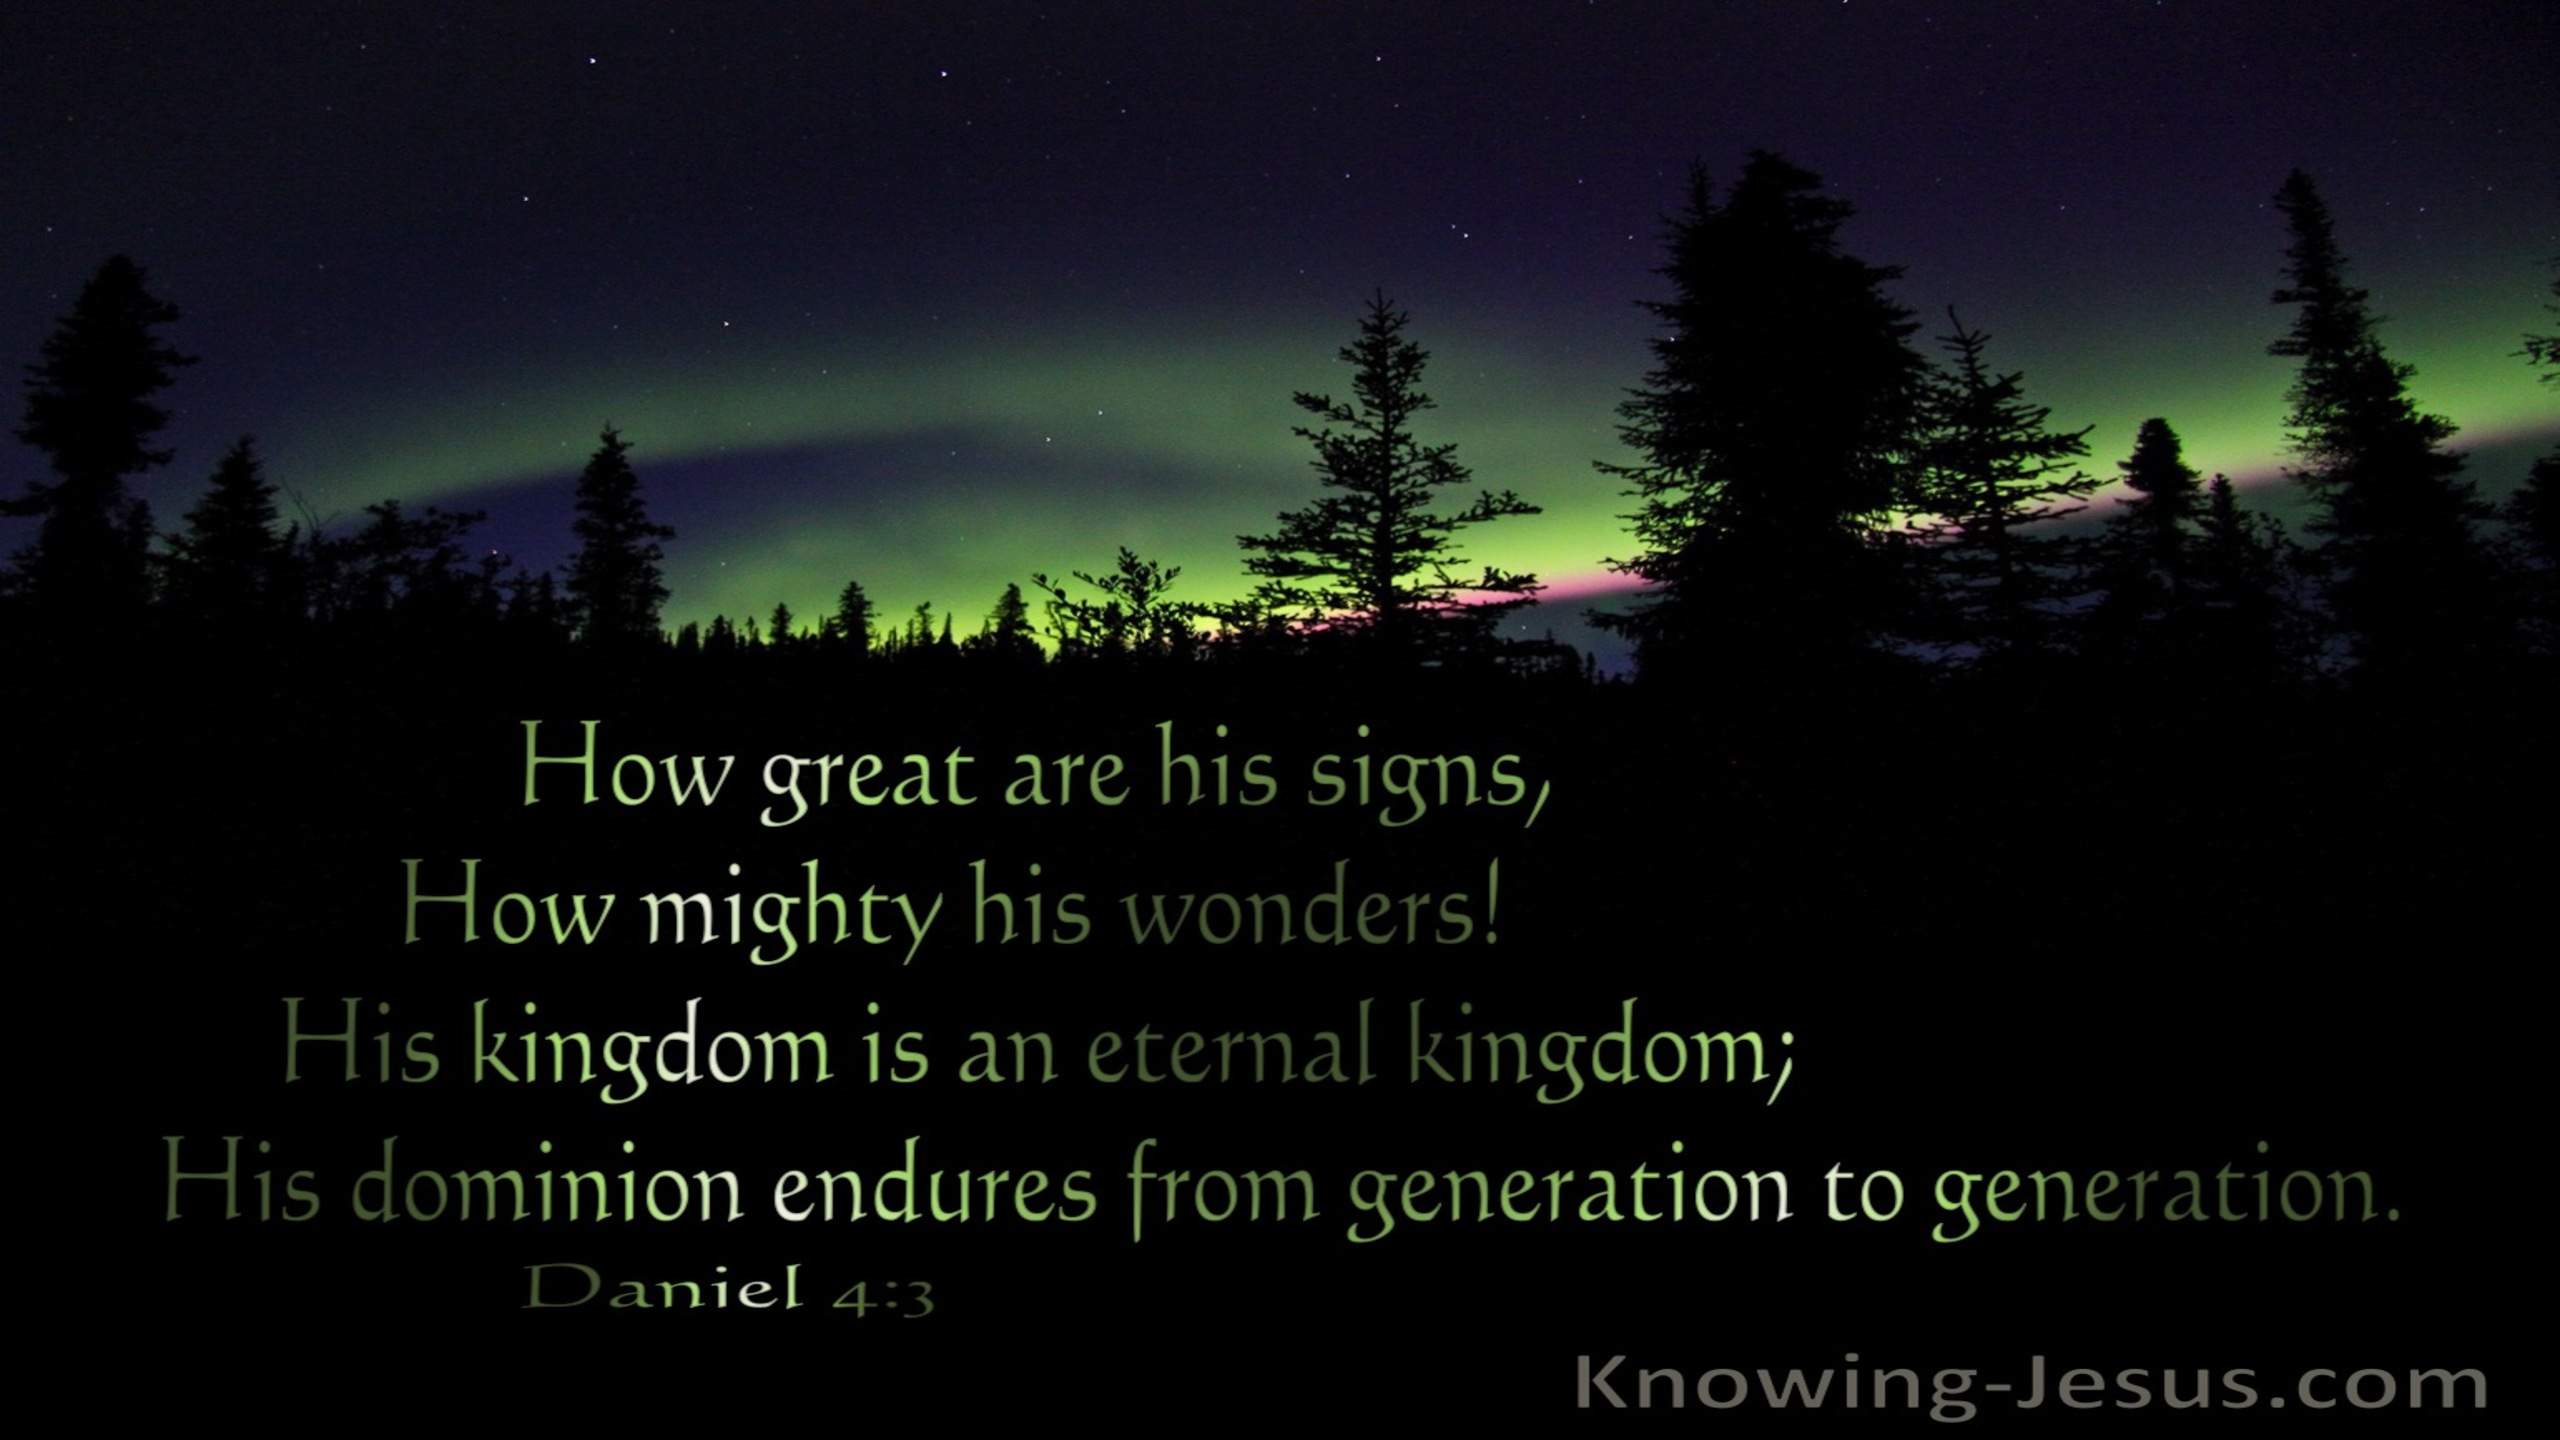 Daniel 4:3 How Great Are His Signs And Mighty His Wonders. His Kingdom is Eternal (black)